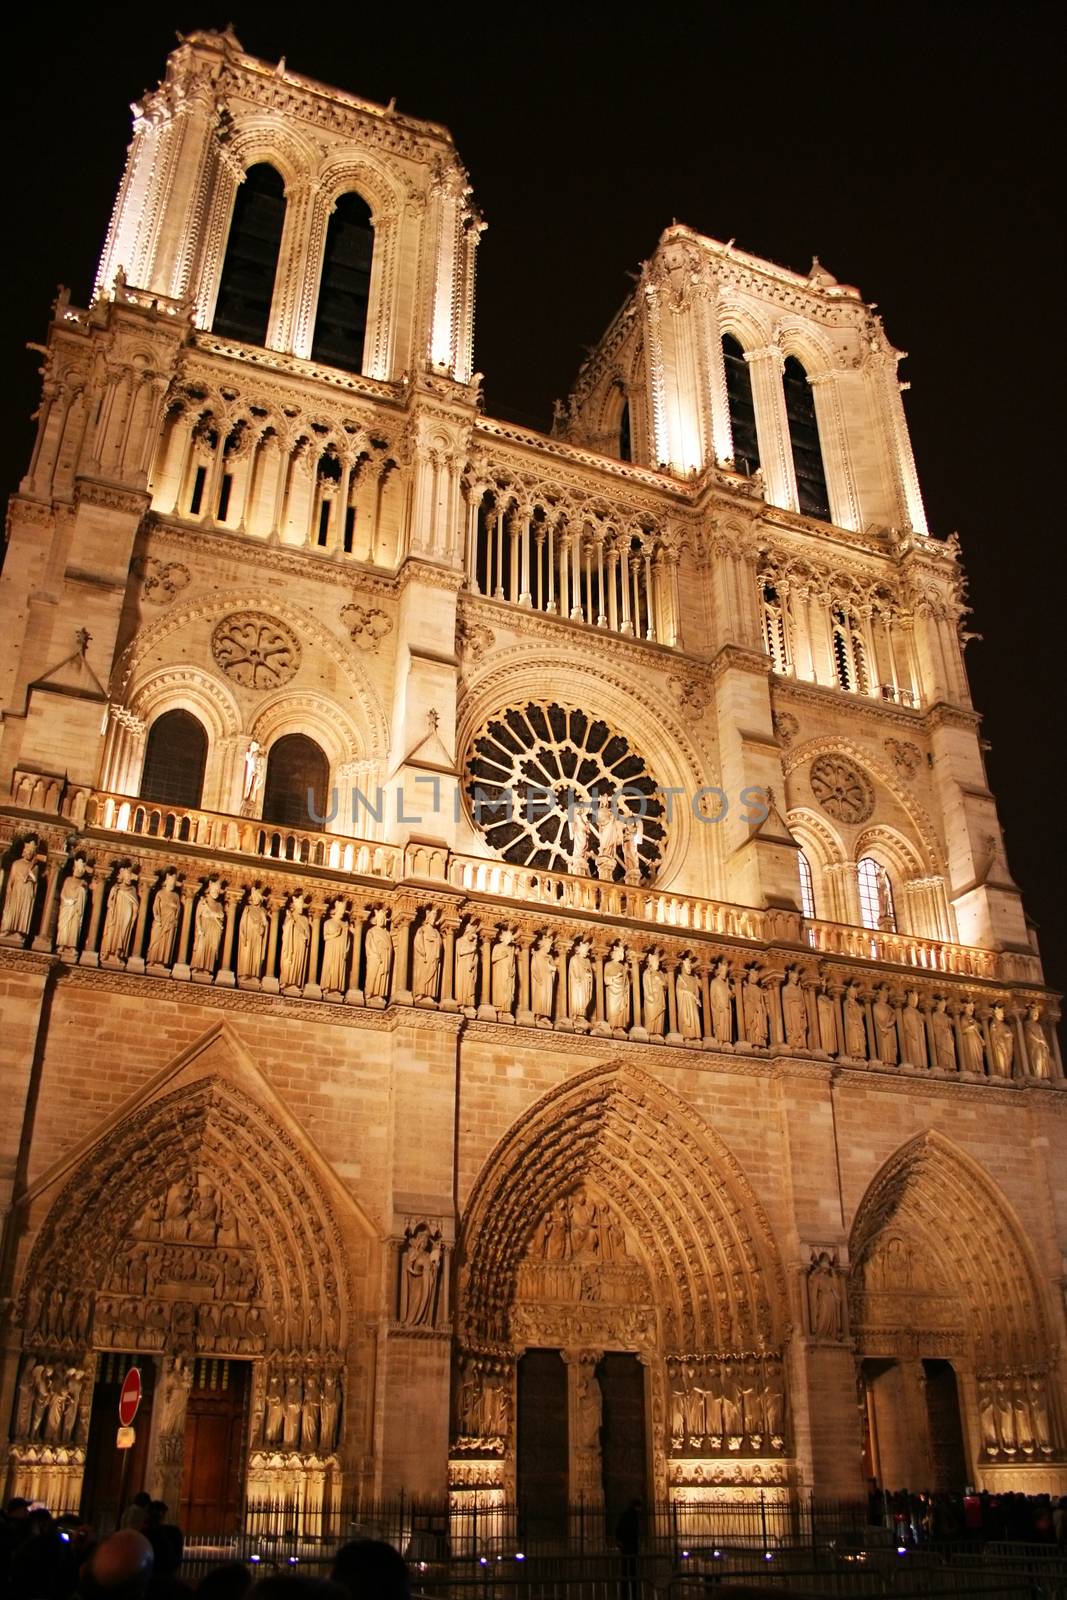 Paris, France - December 25, 2005: Evening in Paris, and the lights on Paris's iconic Cathederale de Notre Dame come on, illuminating the grand structure's gothic features. Numerous tourists are blurred by the long exposure.